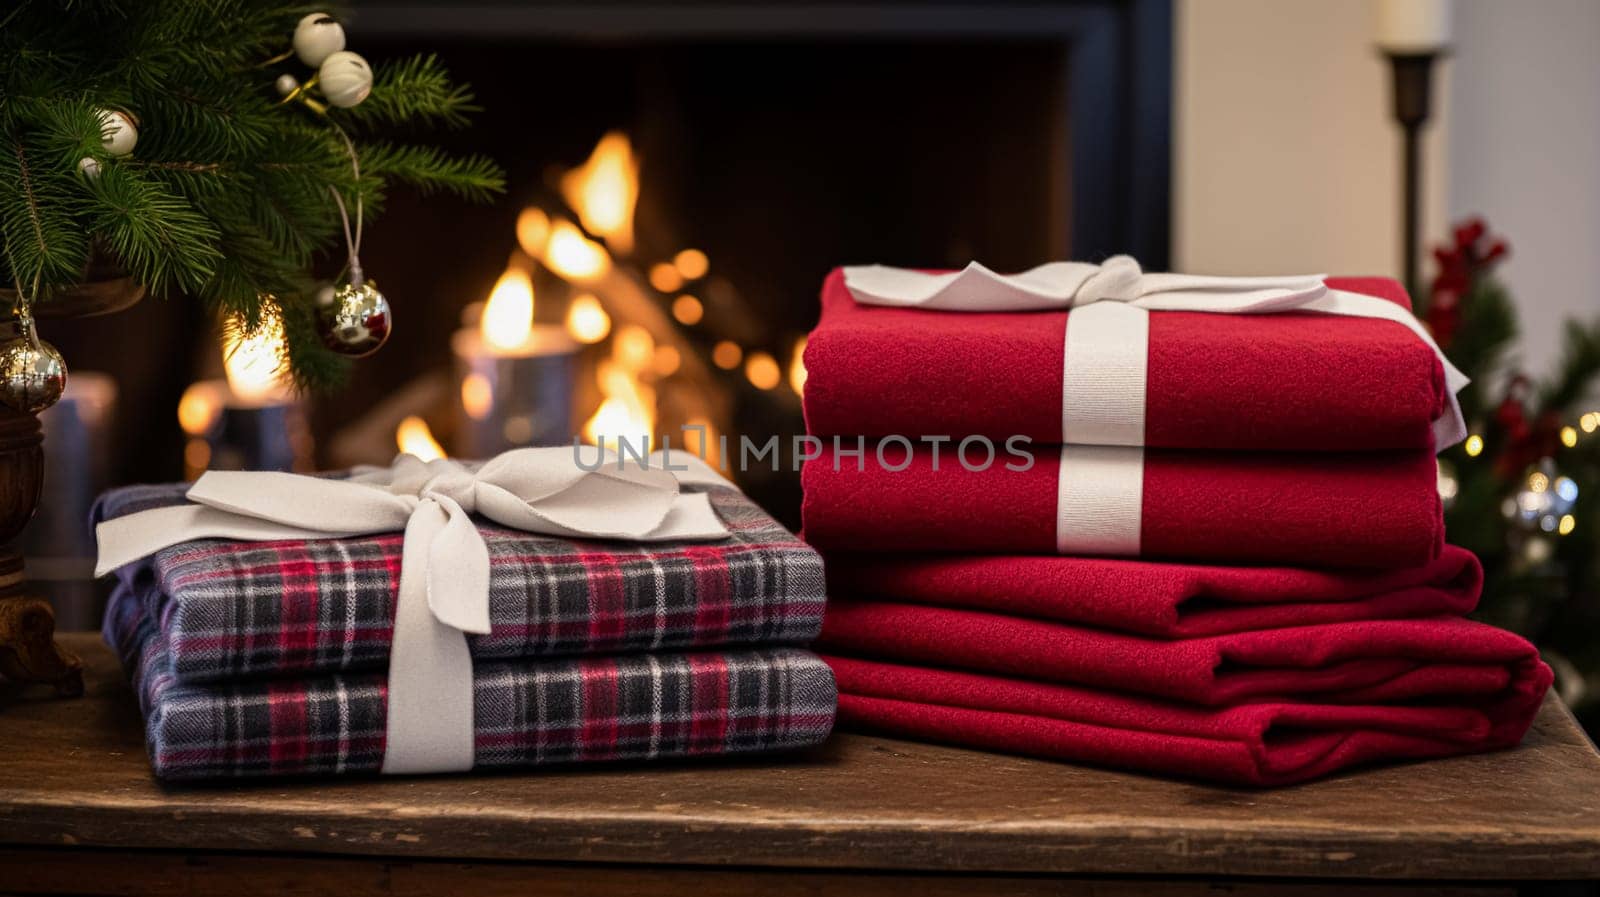 Christmas gift set, blanket, towel and home decor textiles as holiday present for English countryside cottage inspiration